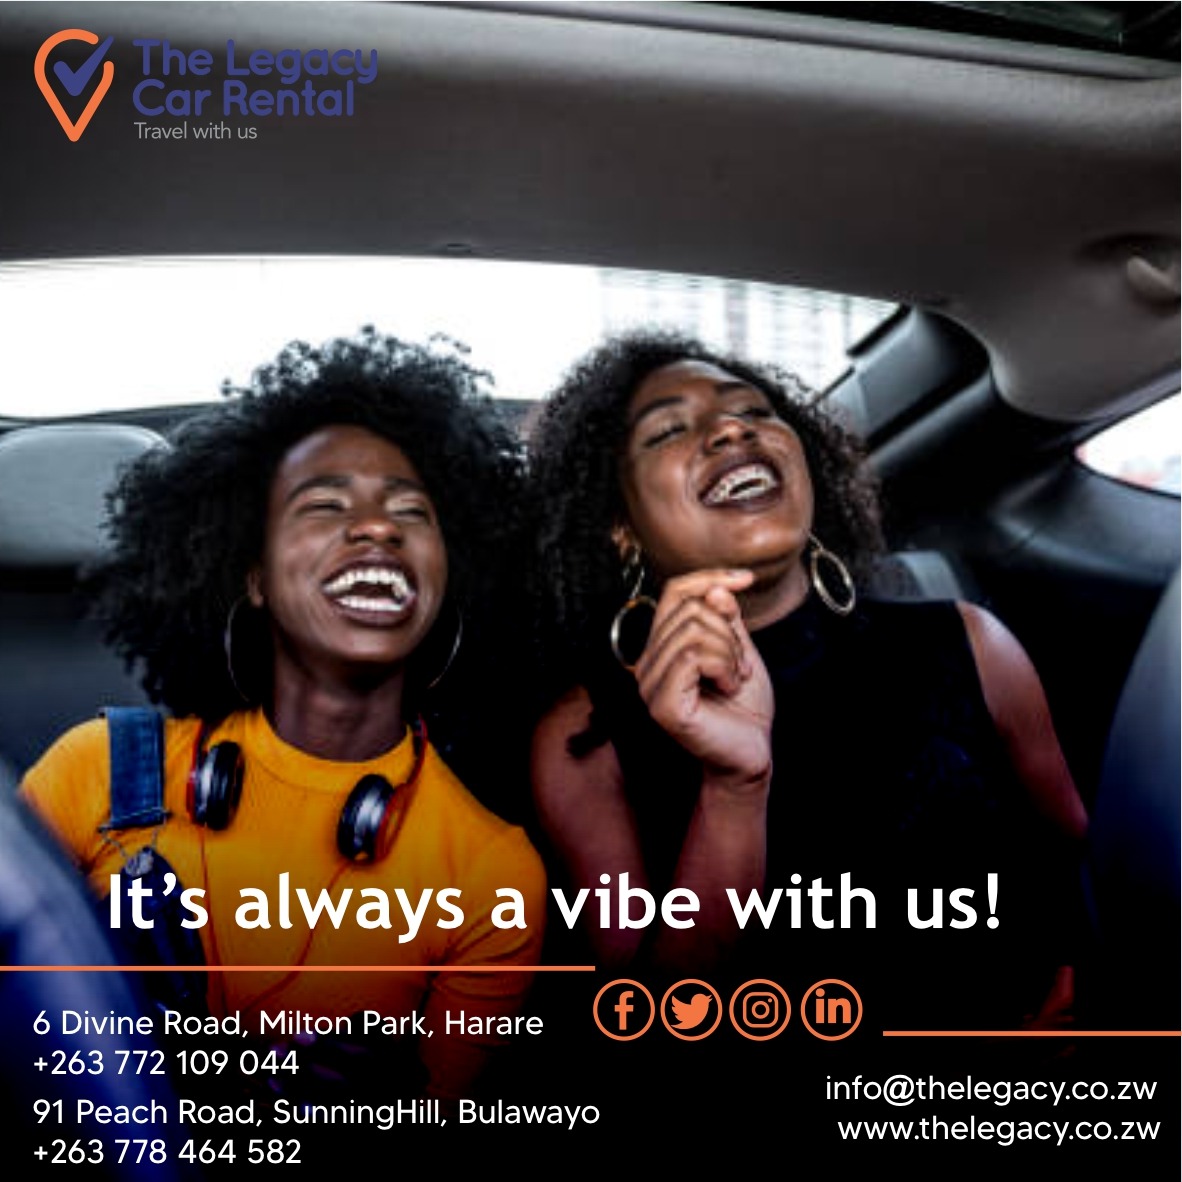 It's always a vibe when you Travel with Us!
#vibe #experts #thebest #carrental #HassleFree #ChauffeurDrive #rent #Bestcare #VibeWithUs #perfectrideeverytime #unforgettable #carhire #vehicle #Bulawayo #hire #car #travel #booknow #travelwithus #rental #legacy #chooseus #bestservice